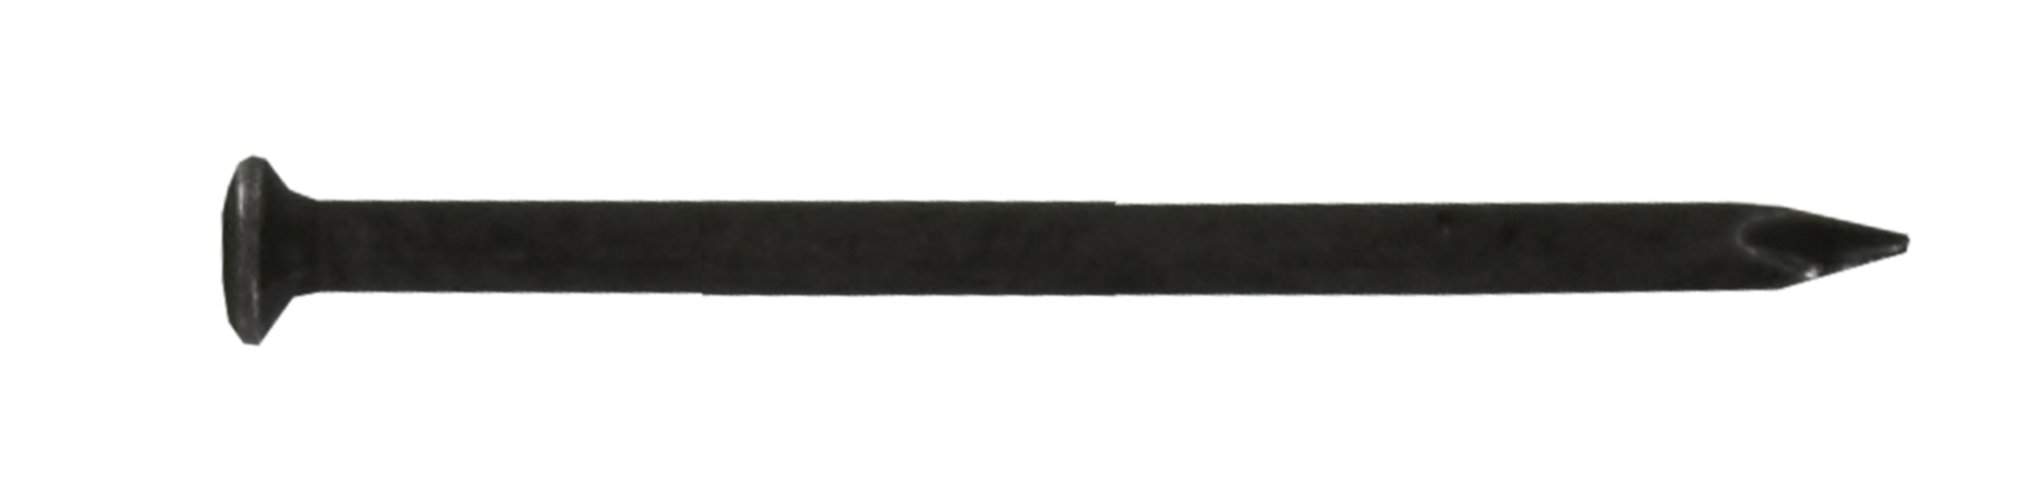 Hardened steel round-headed point 2x30mm, bag of 80<span class='notranslate' data-dgexclude>grams</span>.